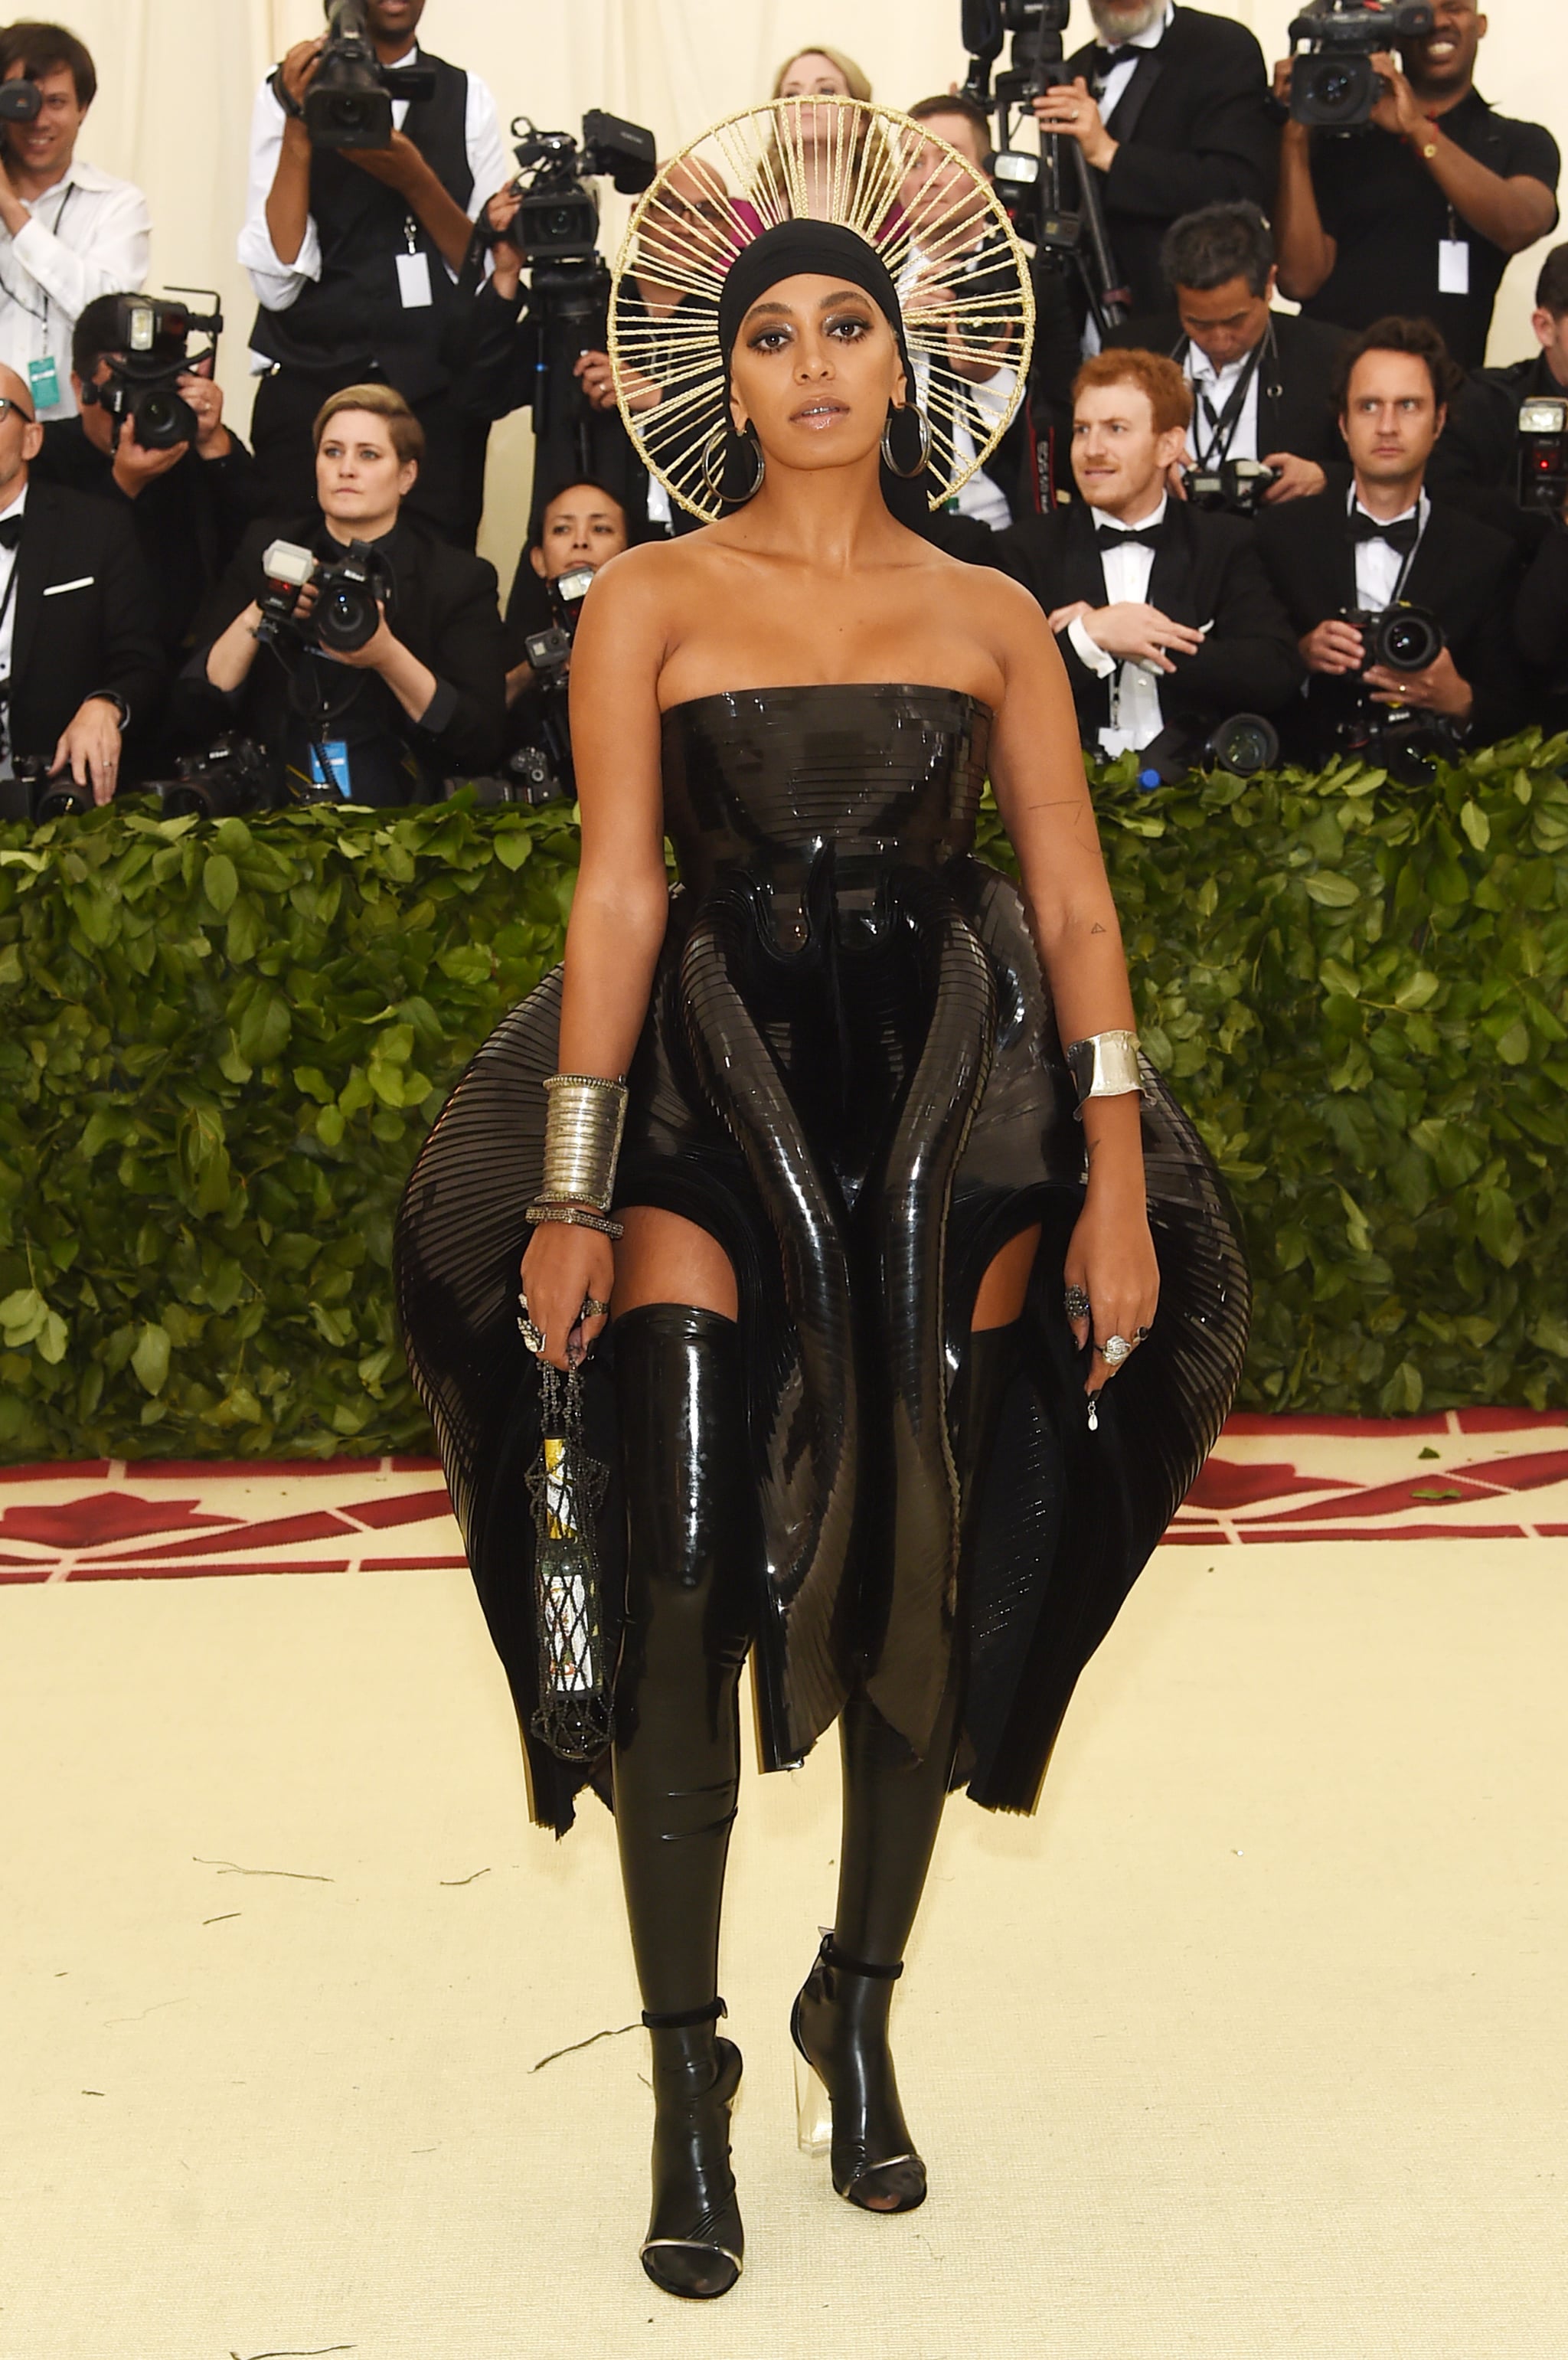 NEW YORK, NY - MAY 07:  Solange Knowles attends the Heavenly Bodies: Fashion & The Catholic Imagination Costume Institute Gala at The Metropolitan Museum of Art on May 7, 2018 in New York City.  (Photo by Jamie McCarthy/Getty Images)